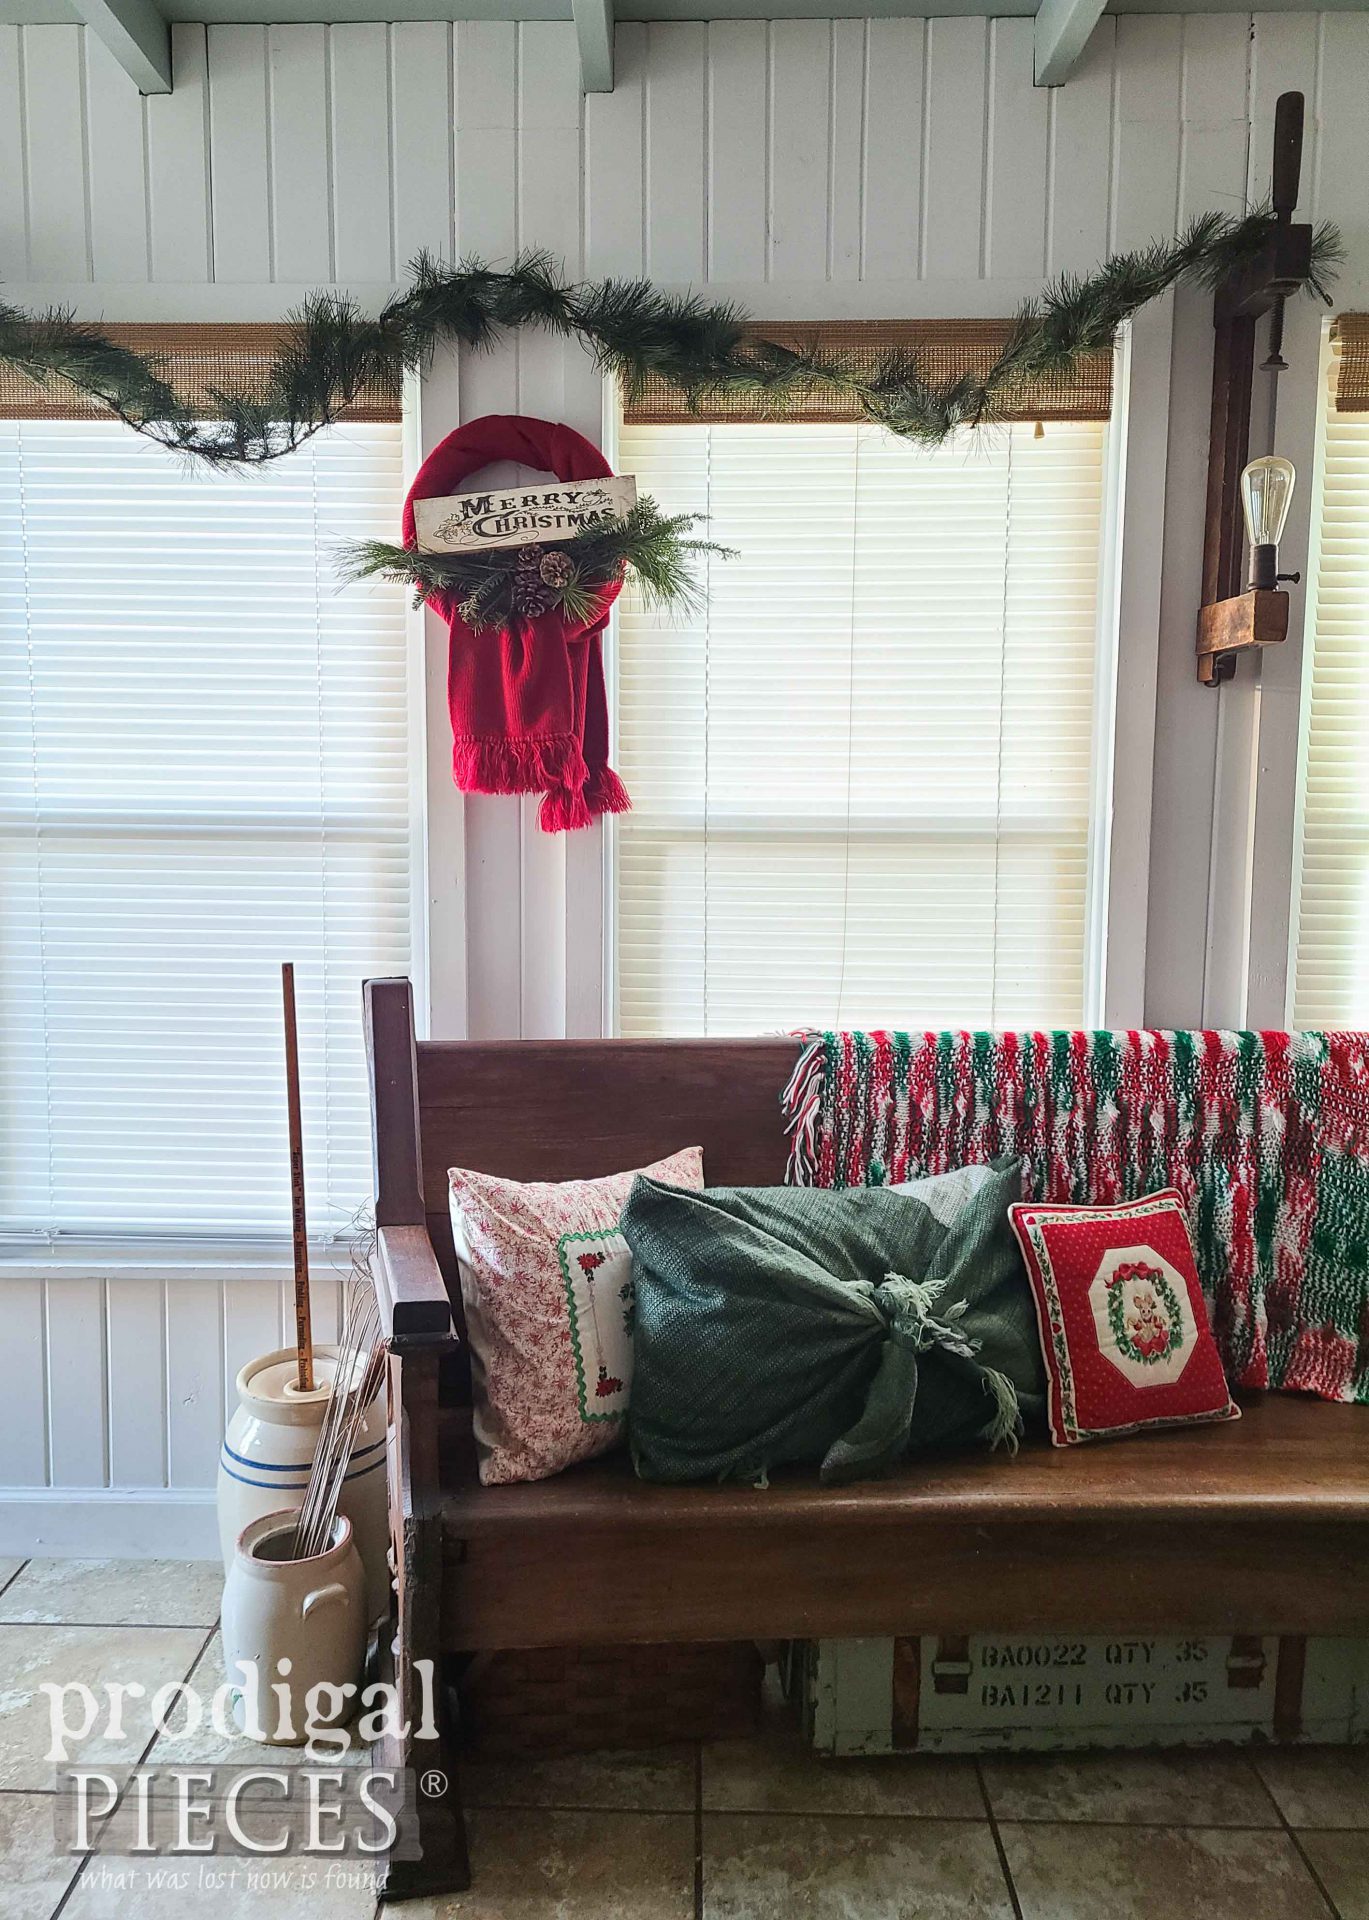 Upcycled Christmas Decor from Refashioned Scarves | A Gift that Keeps on Giving by Larissa of Prodigal Pieces | prodigalpieces.com #prodigalpieces #christmas #upcycled #refashioned #home